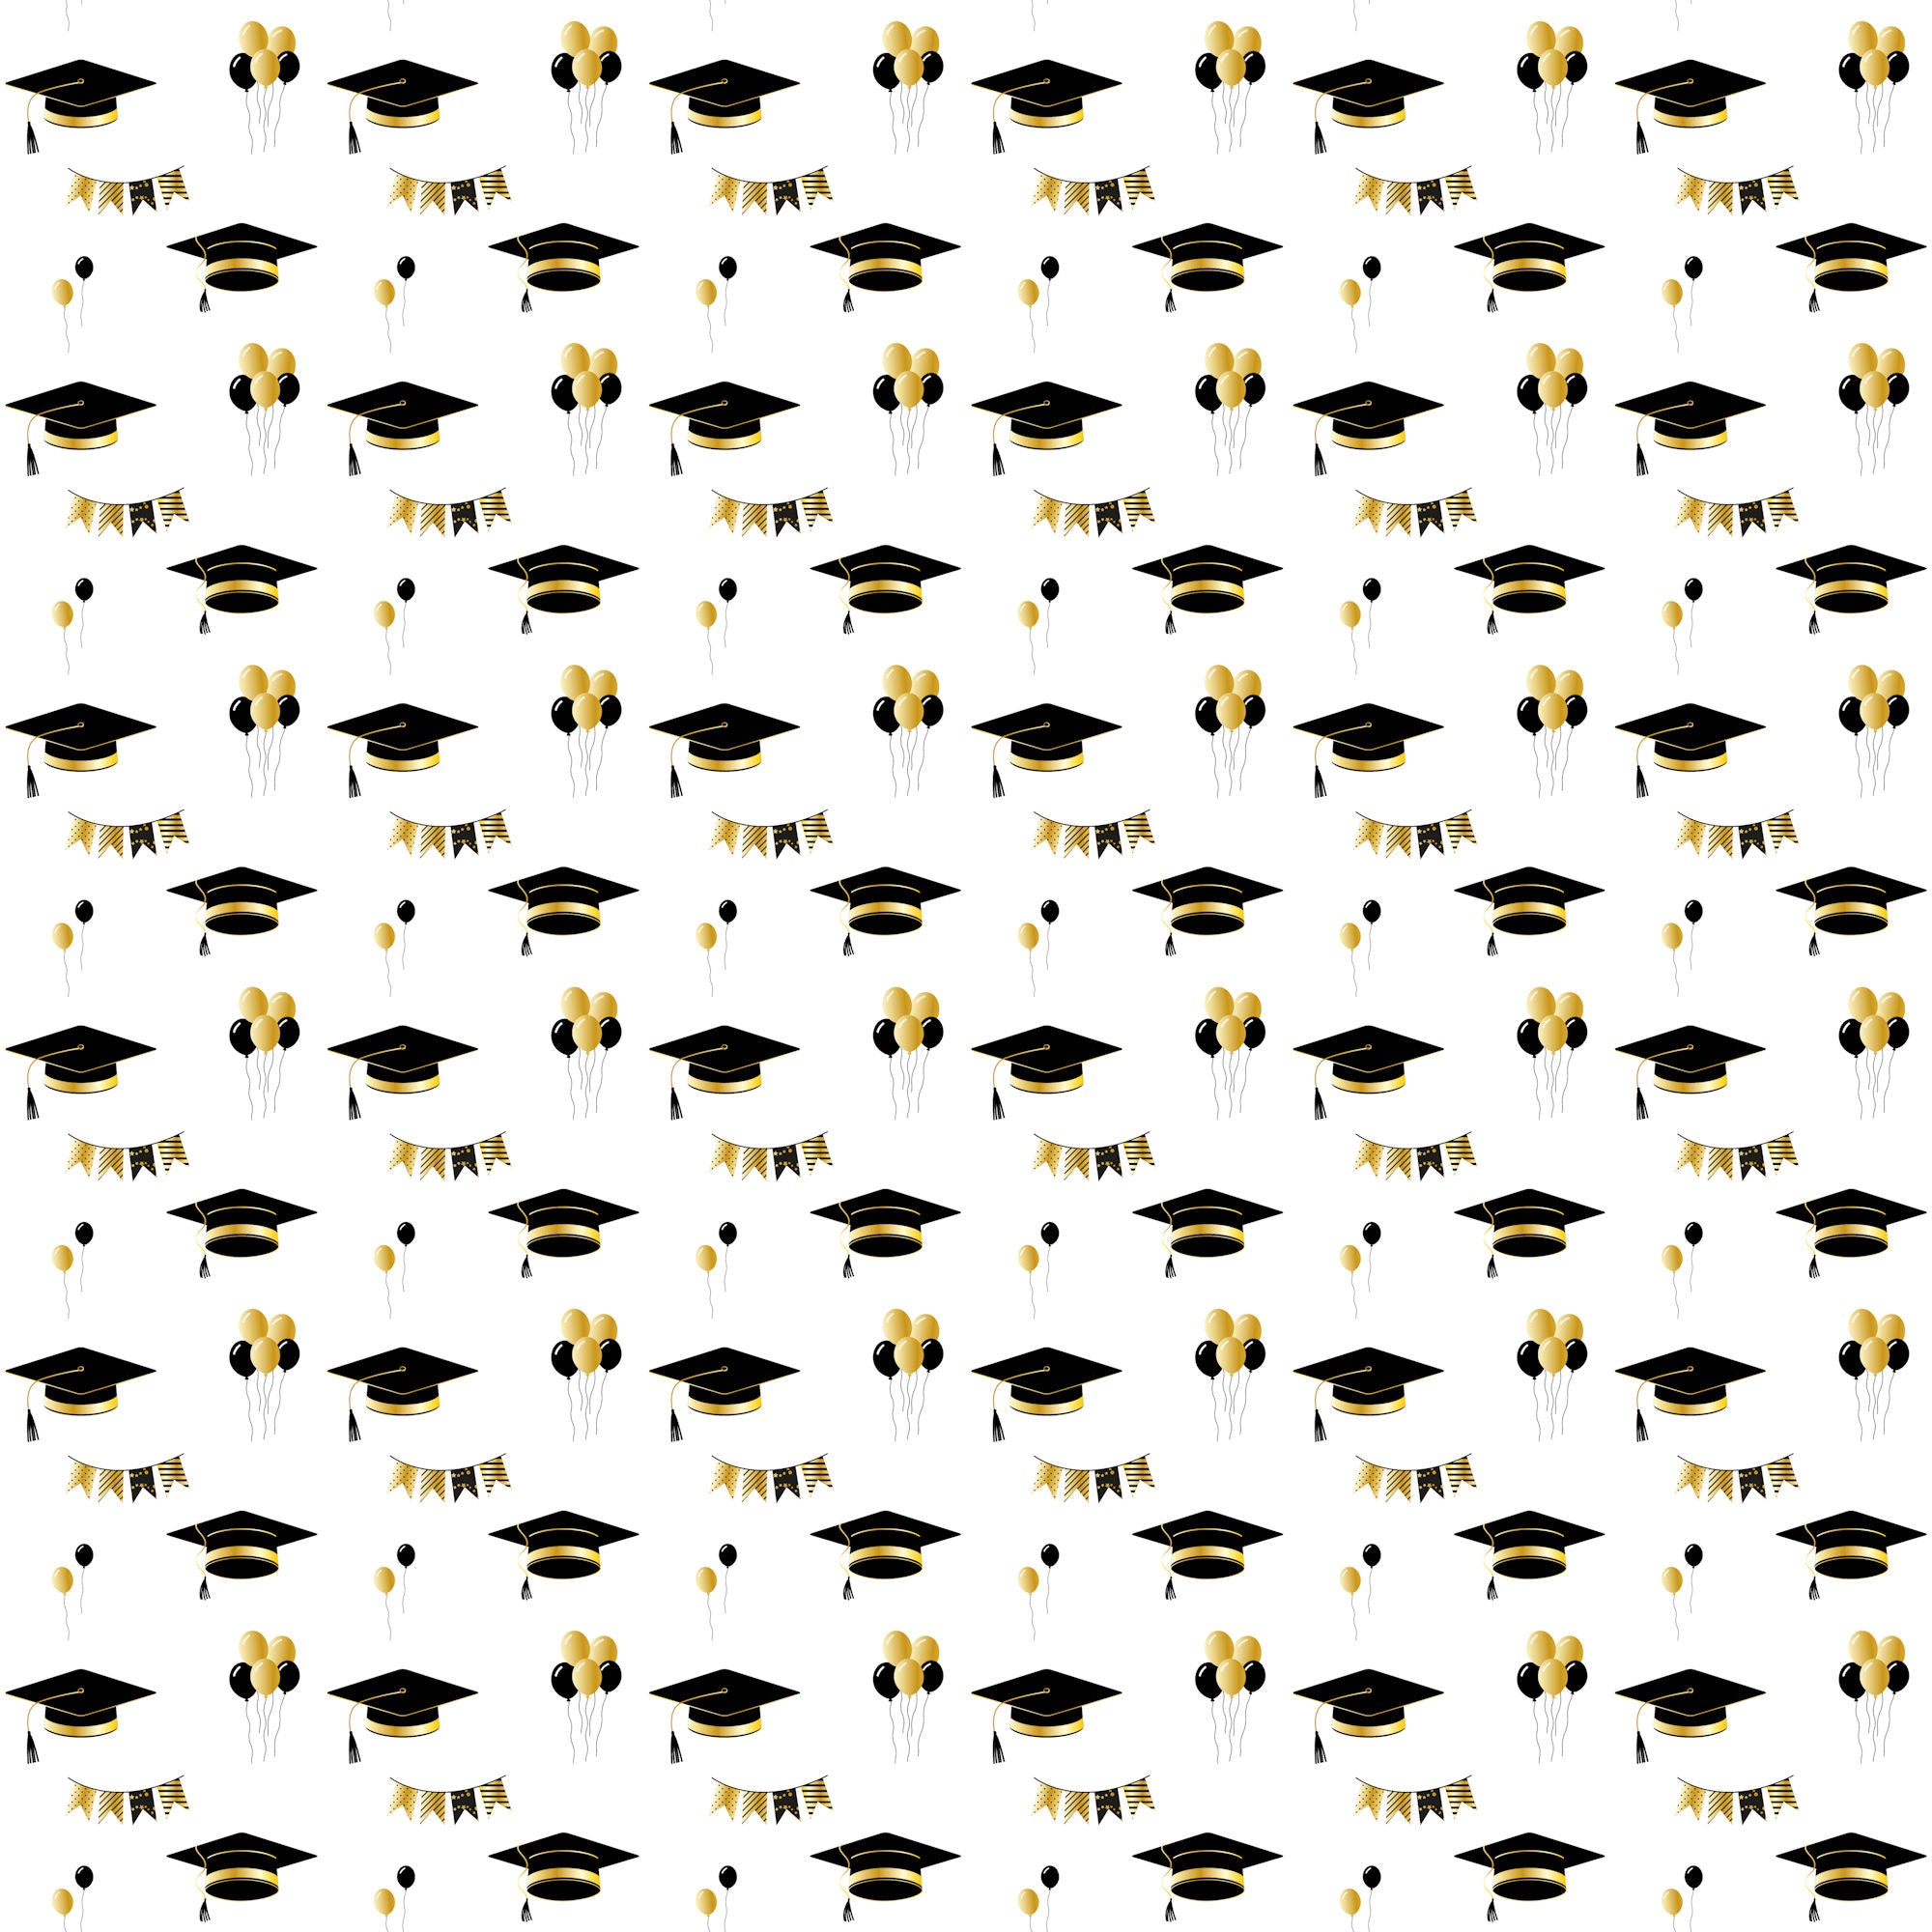 Graduation Collection Congratulations 12 x 12 Double-Sided Scrapbook Paper by SSC Designs